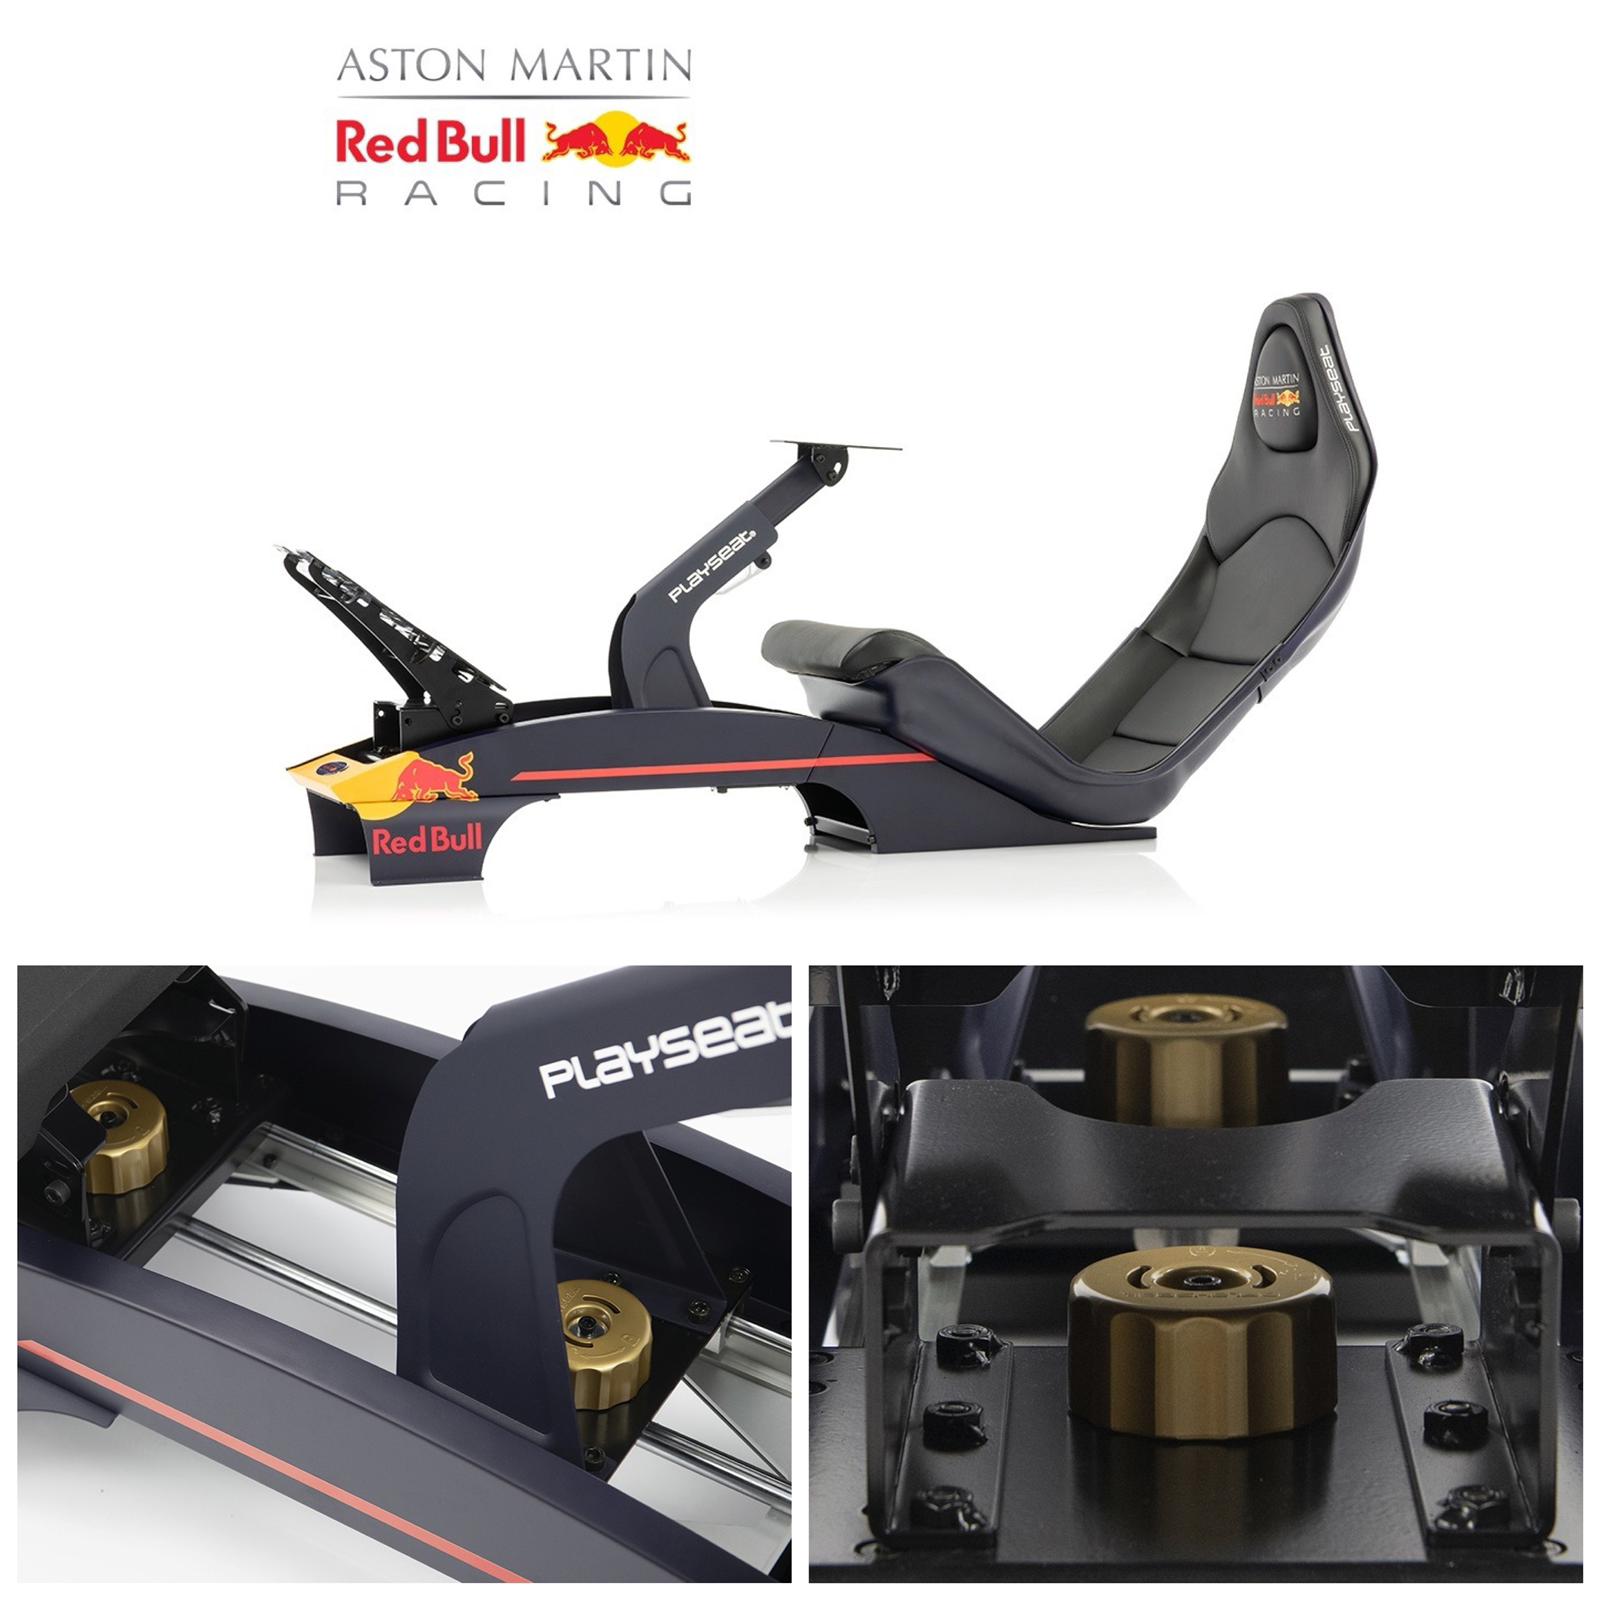 PlayseatStore on Twitter: "NEW - The official licensed Aston Martin Red  Bull Racing edition of the new Playseat® PRO F1 now has the Playseat®  ForceLock™ system, which allows extreme forces to be